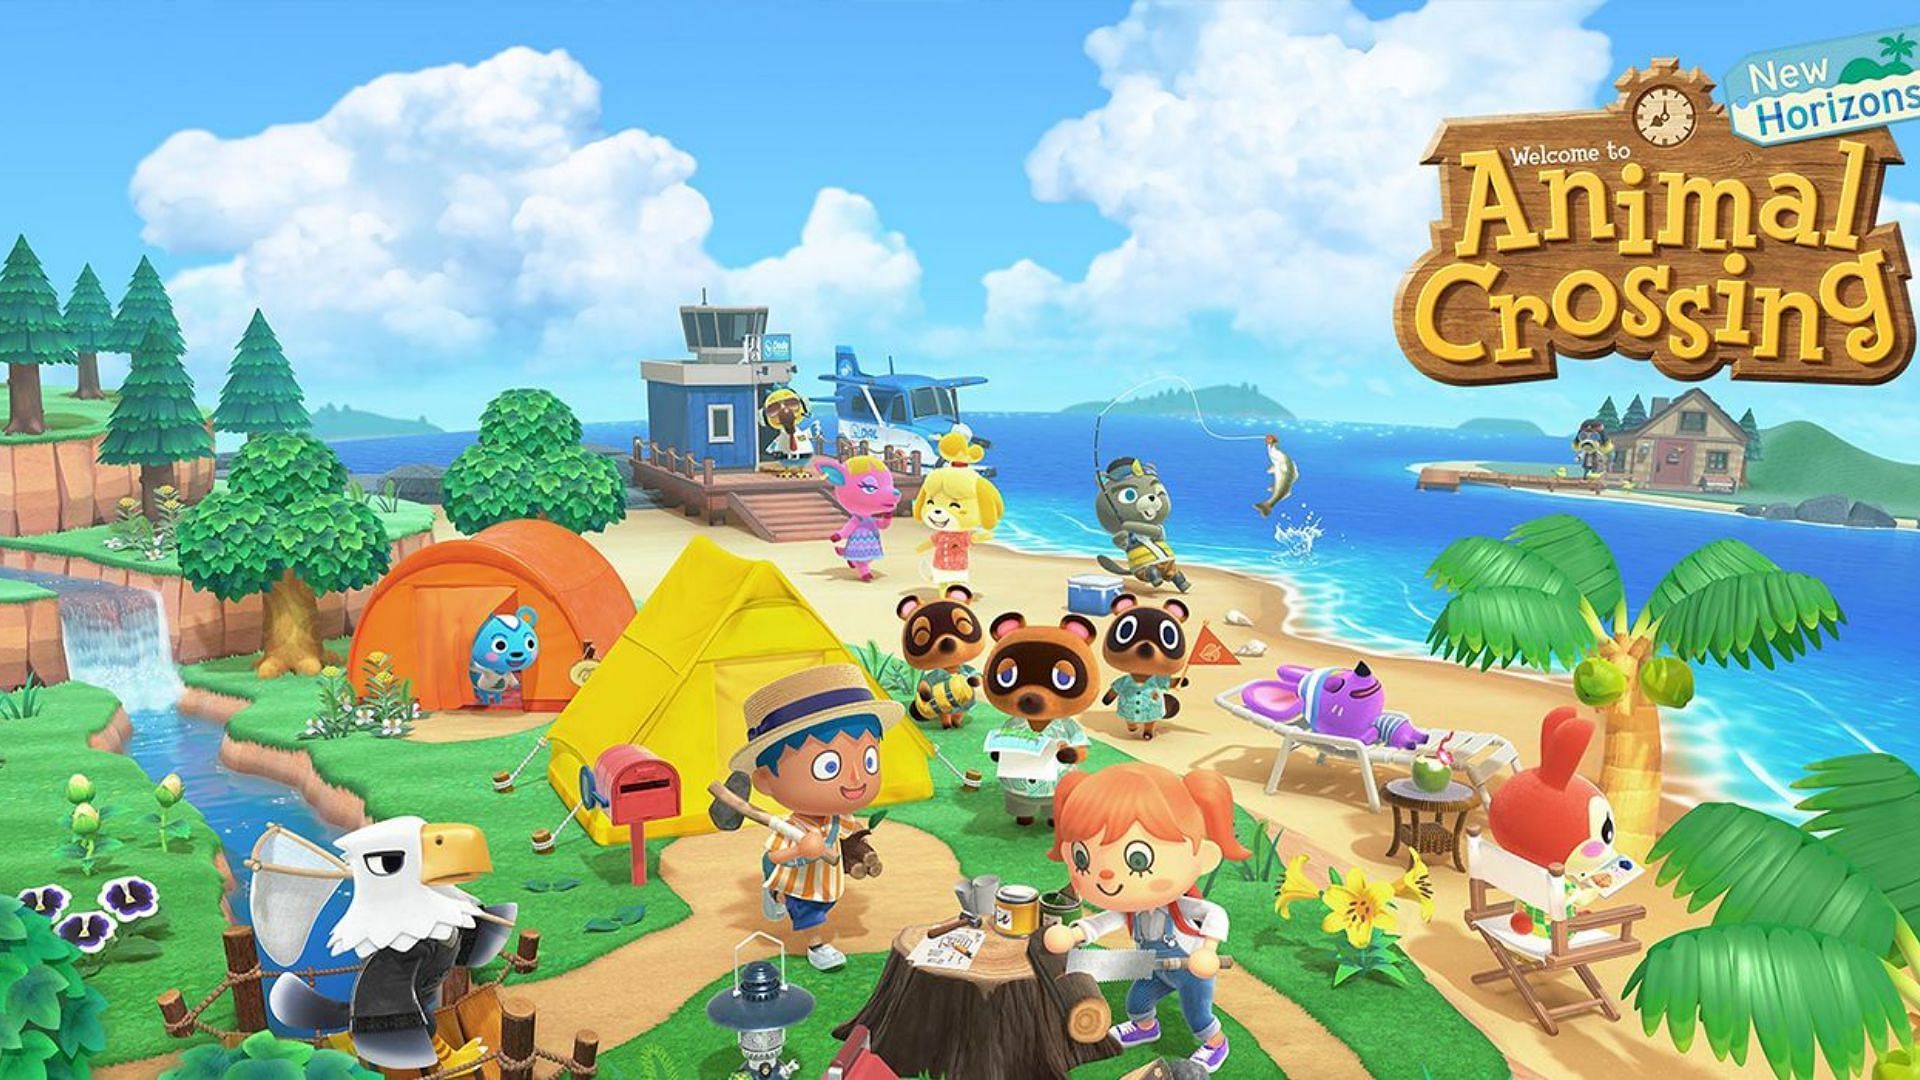 Most difficult achievements in Animal Crossing: New Horizons explained (Image via Nintendo)